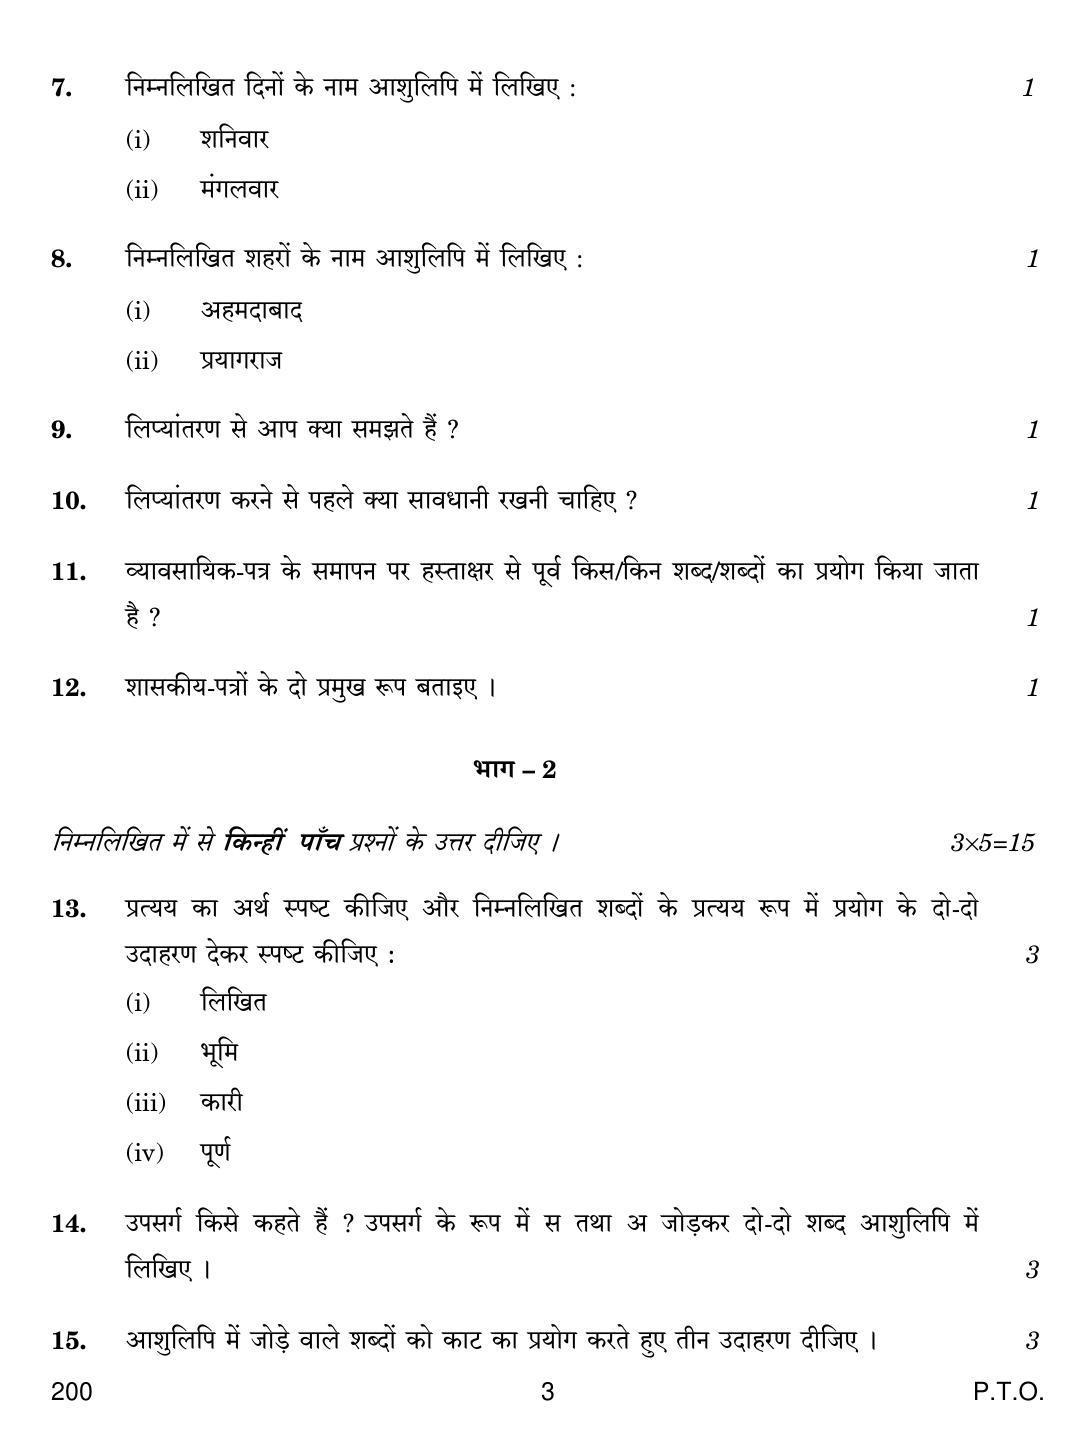 CBSE Class 12 200 SHORTHAND HINDI 2019 Compartment Question Paper - Page 3